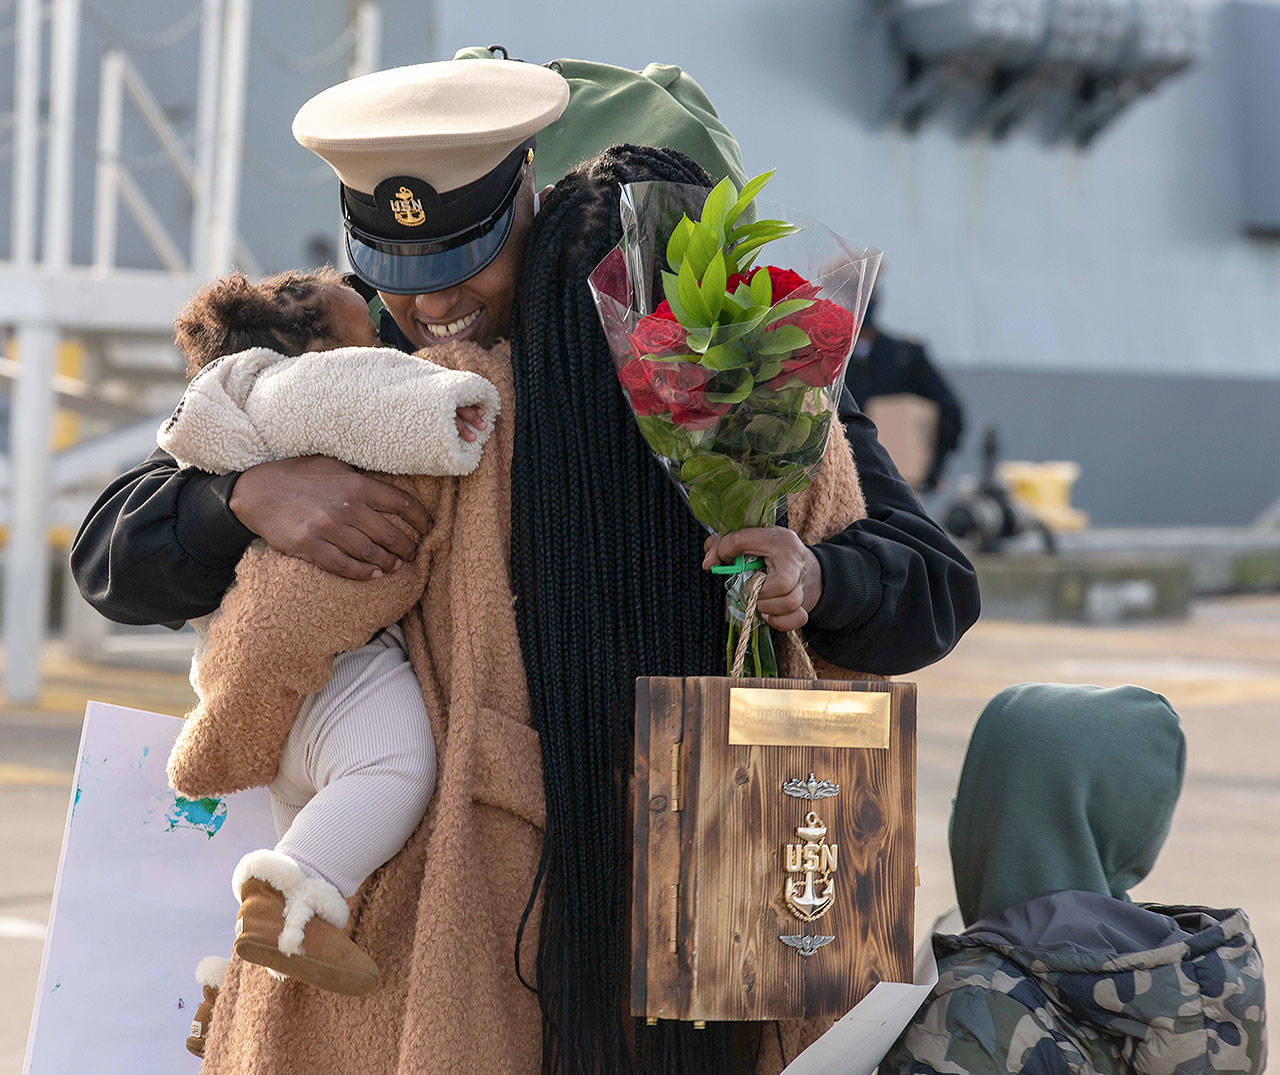 Kirubel Weldeyes reunites with his family at Naval Station Everett Jan. 14, 2021. (U.S. Navy photo by Mass Communication Specialist 3rd Class Ethan J. Soto)